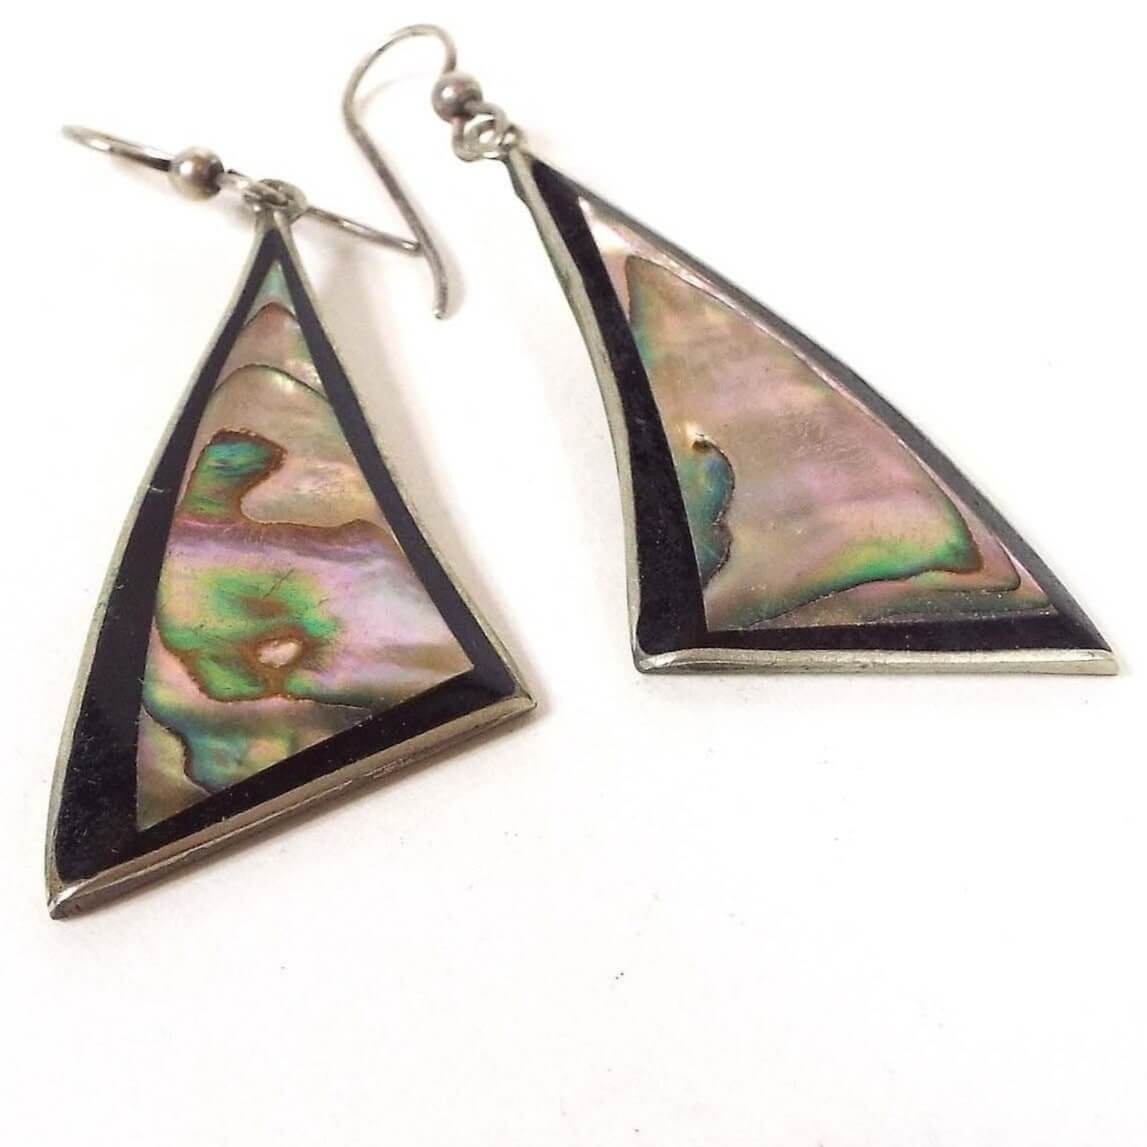 Front side of the Mexican Alpaca earrings. The metal is a darker silver in color from age. The drops are curved triangles with large pieces of pearly multi color inlaid abalone shell. The edge around the abalone is black resin enamel. Tops have pierced fish hook style ear wires.